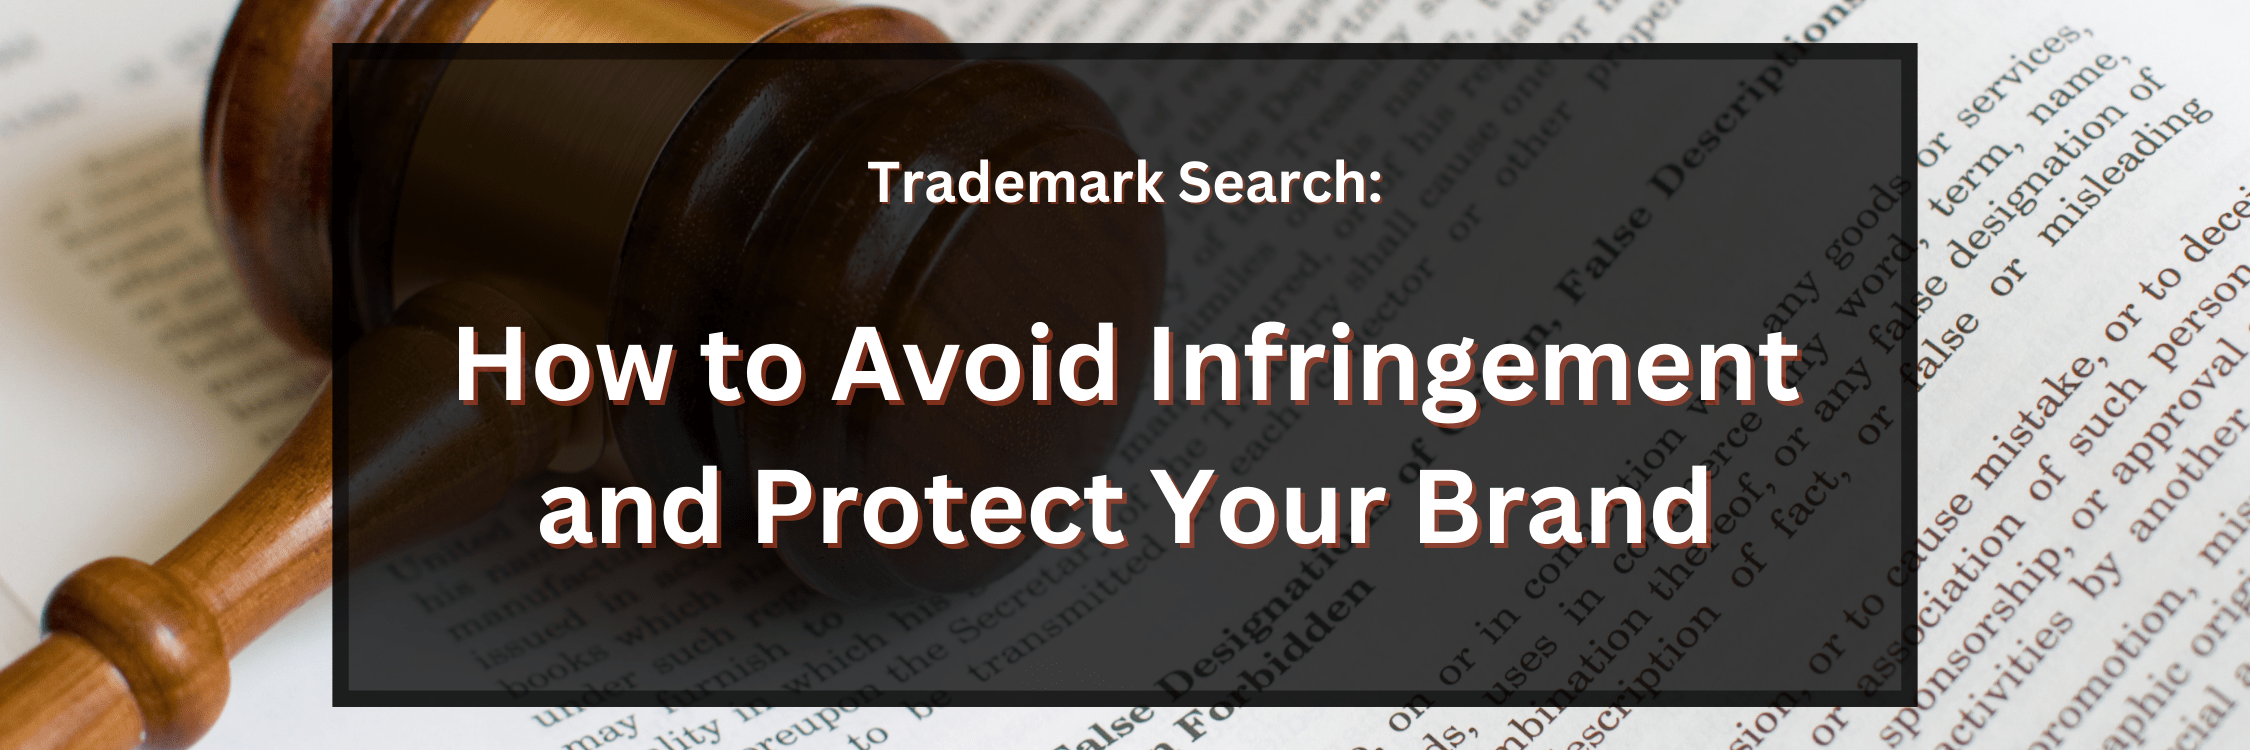 Trademark Search: How to Avoid Infringement and Protect Your Brand